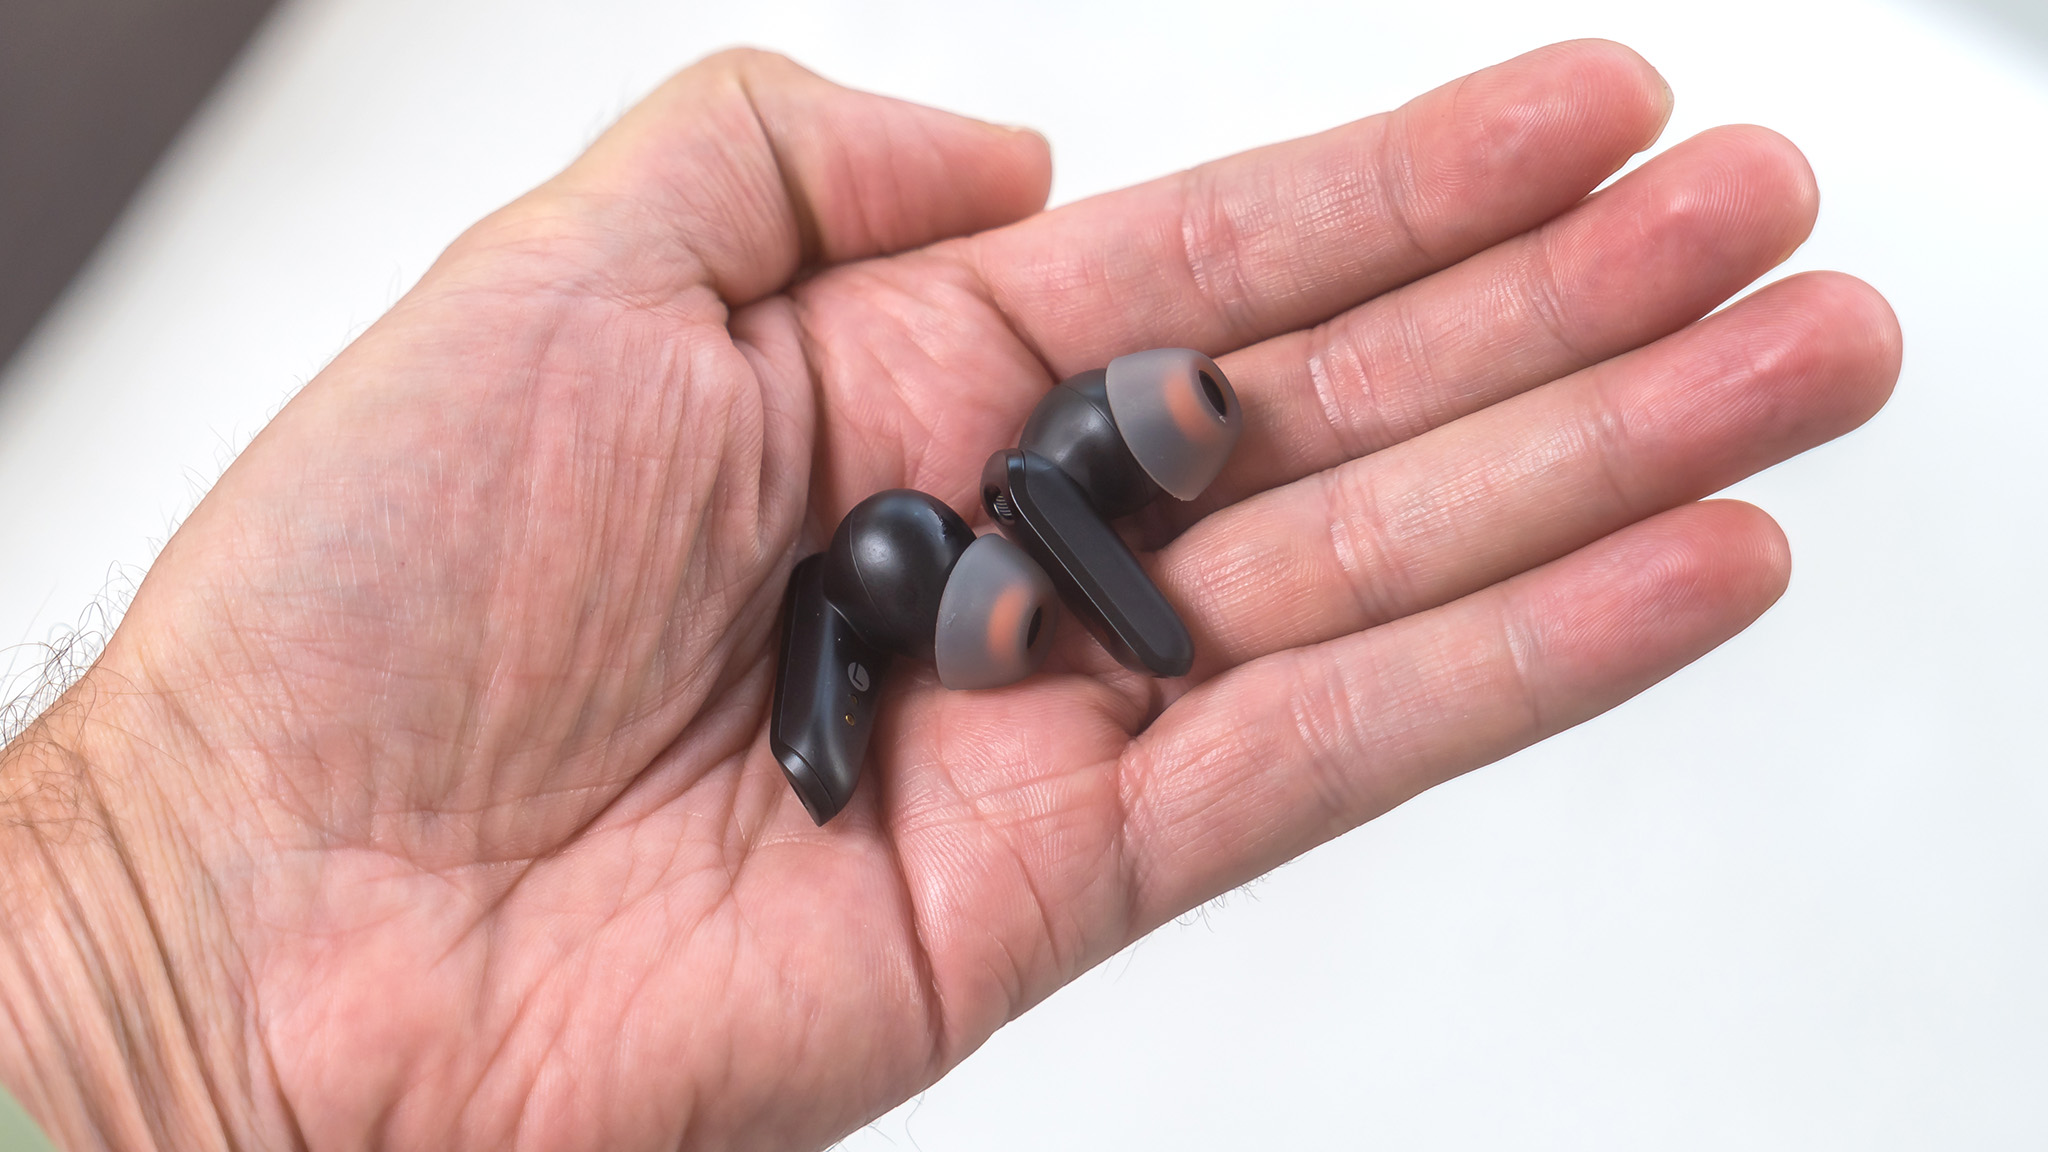 Edifier NeoBuds S earbuds in hand.